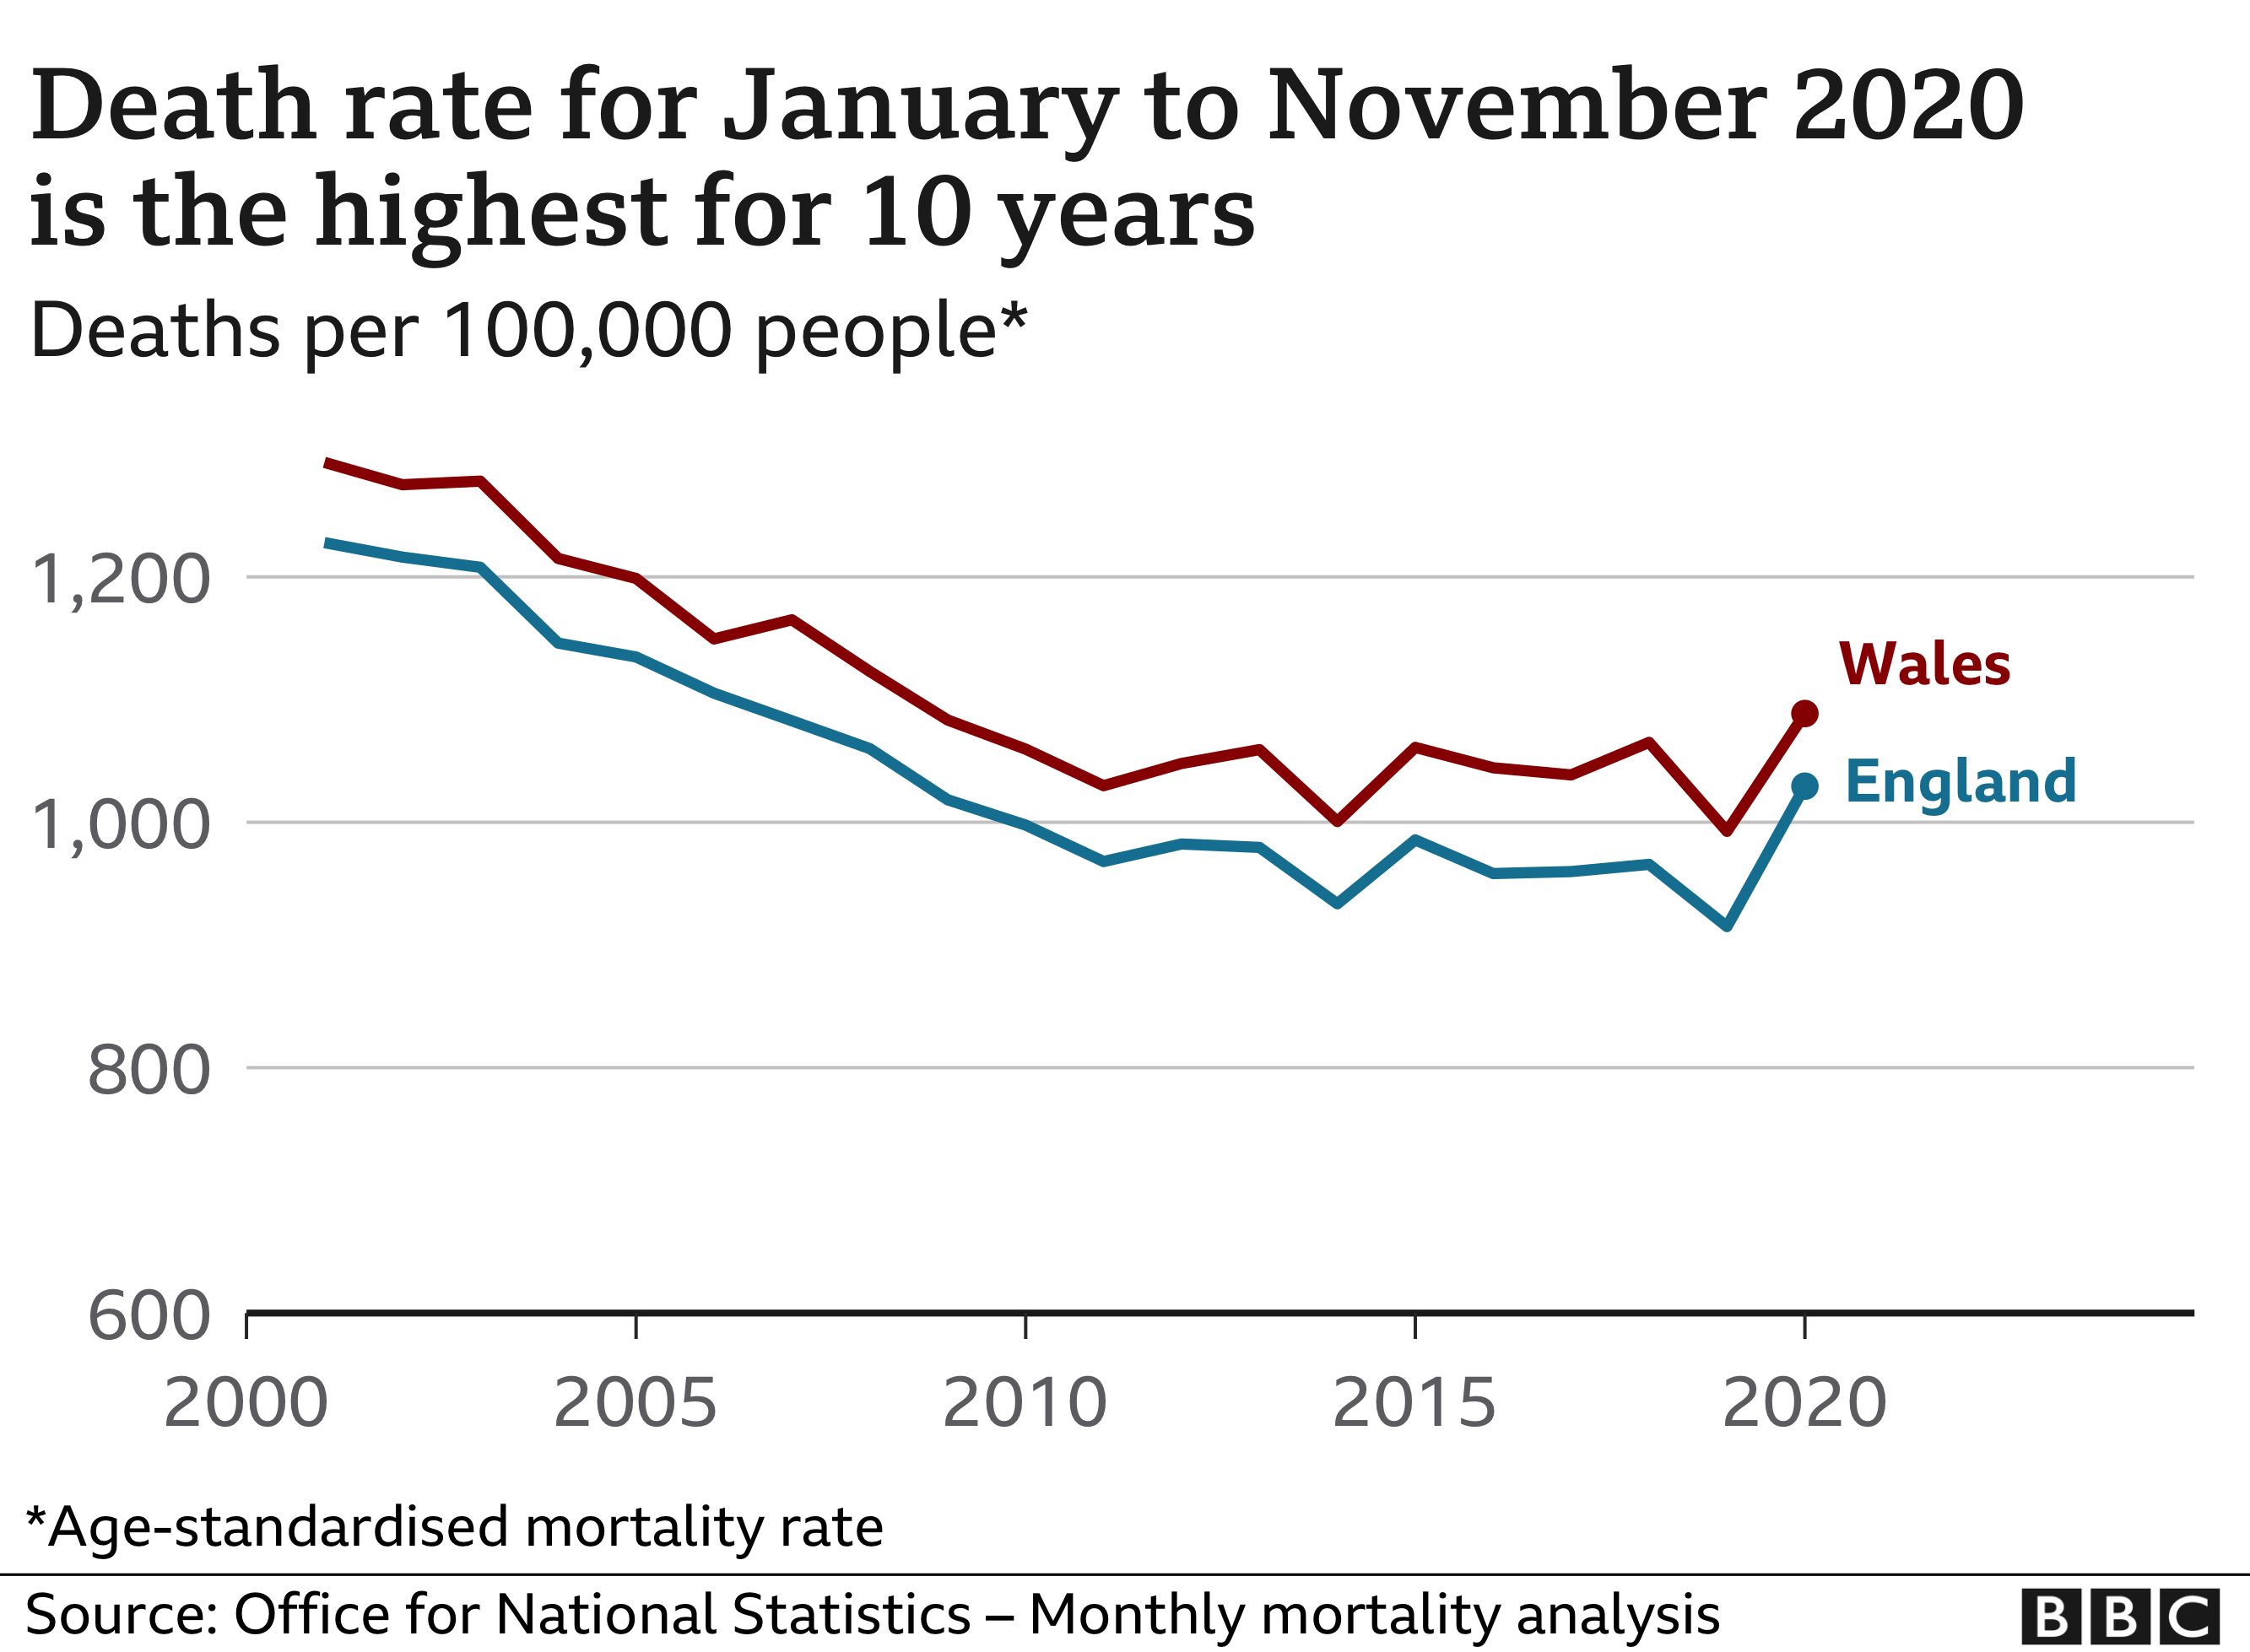 2020 saw most deaths since 1918 2008